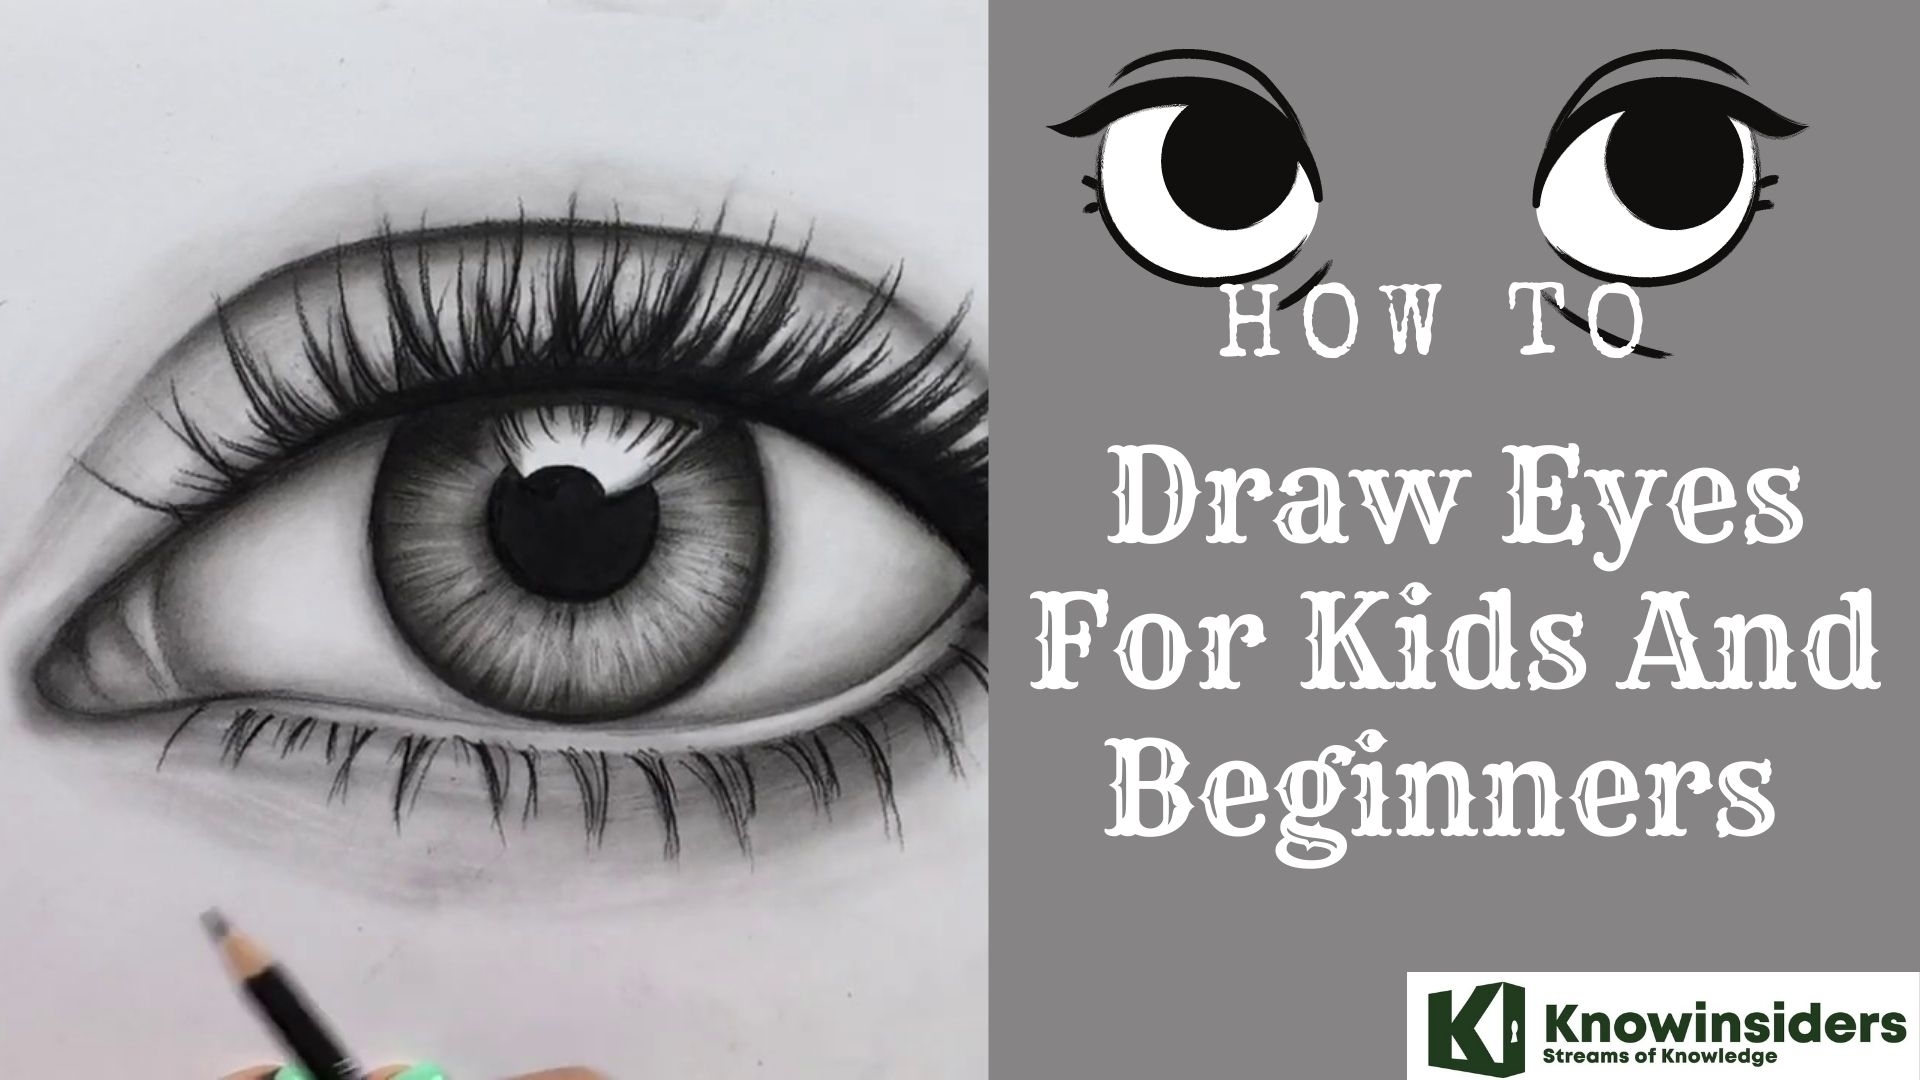 How to draw eyes for kids and beginners 